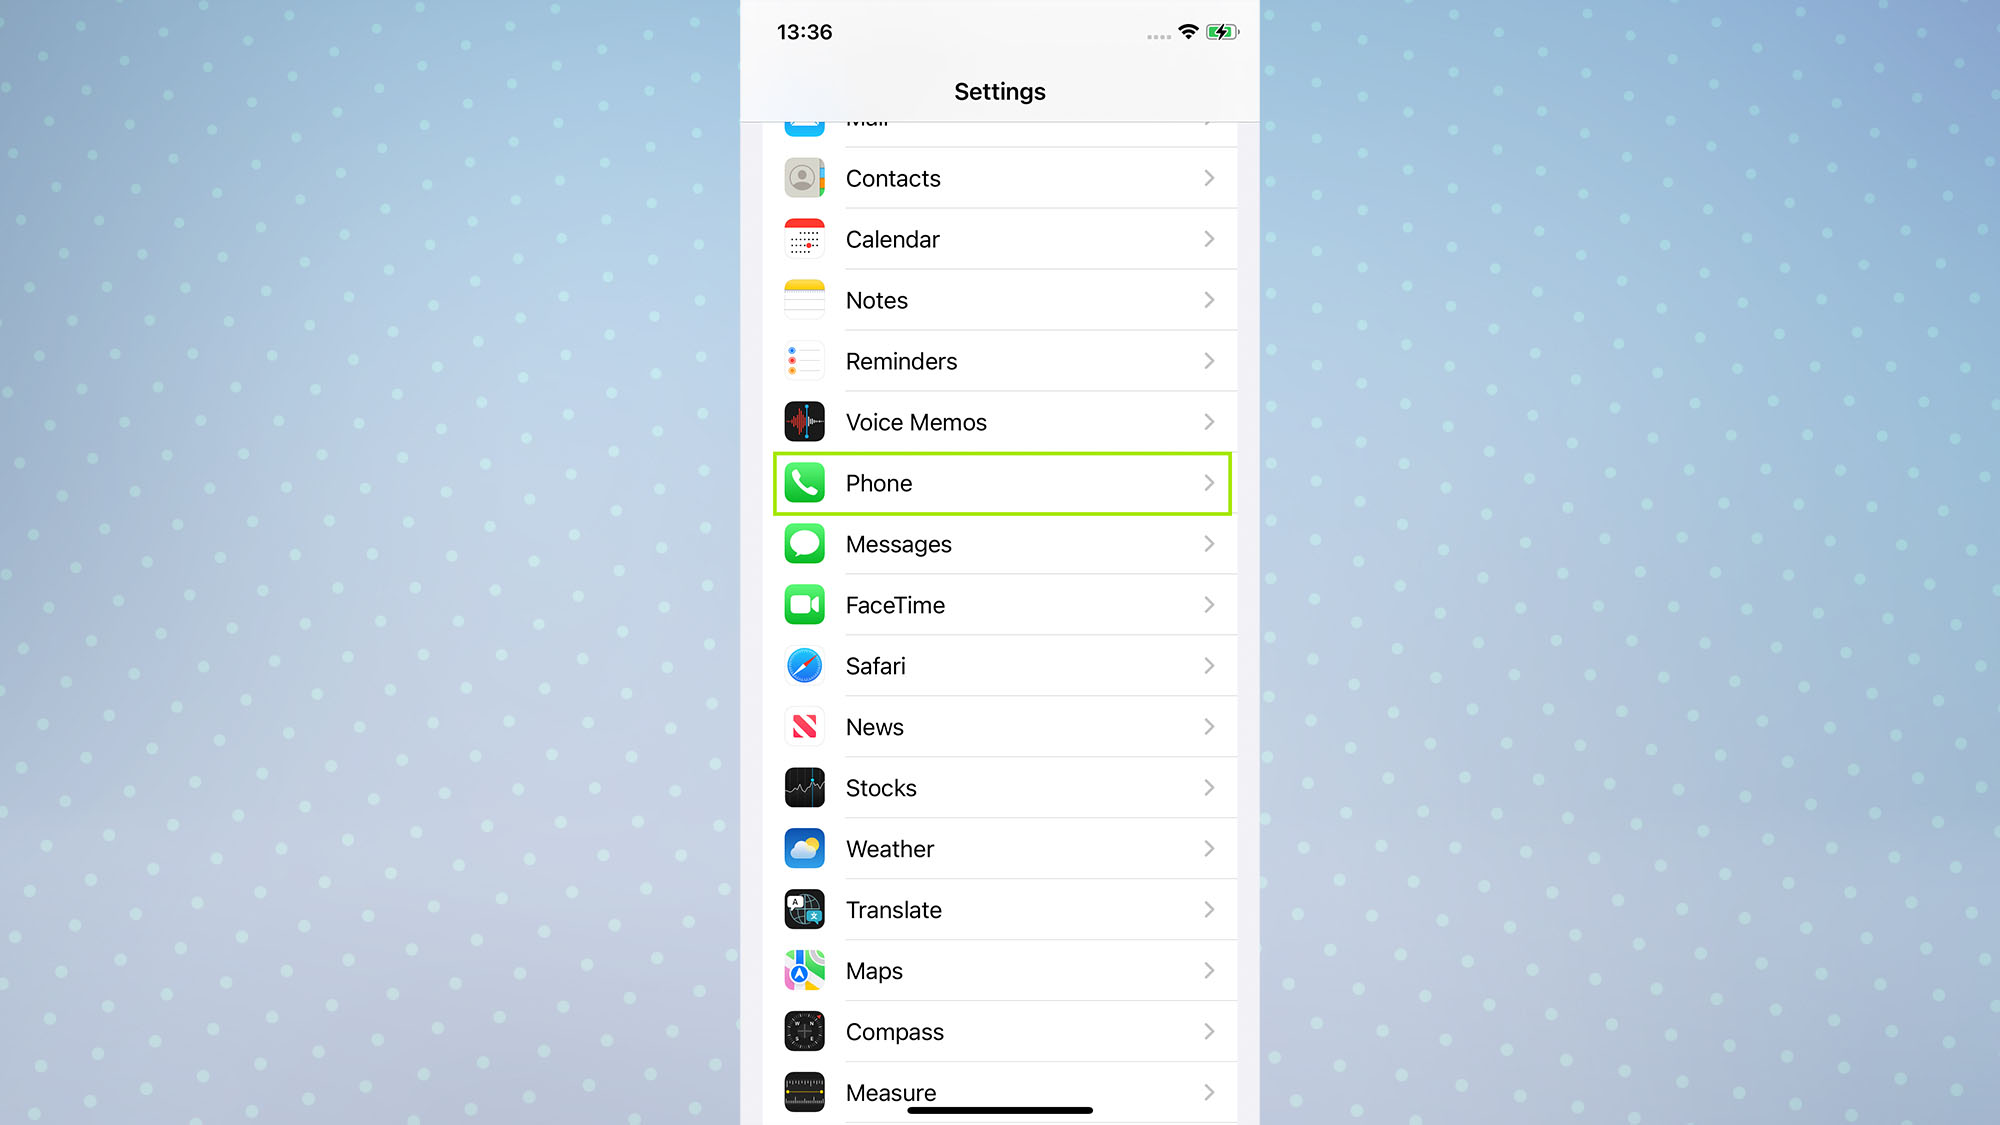 A screenshot of an iPhone screen showing the Settings app with Phone highlighted